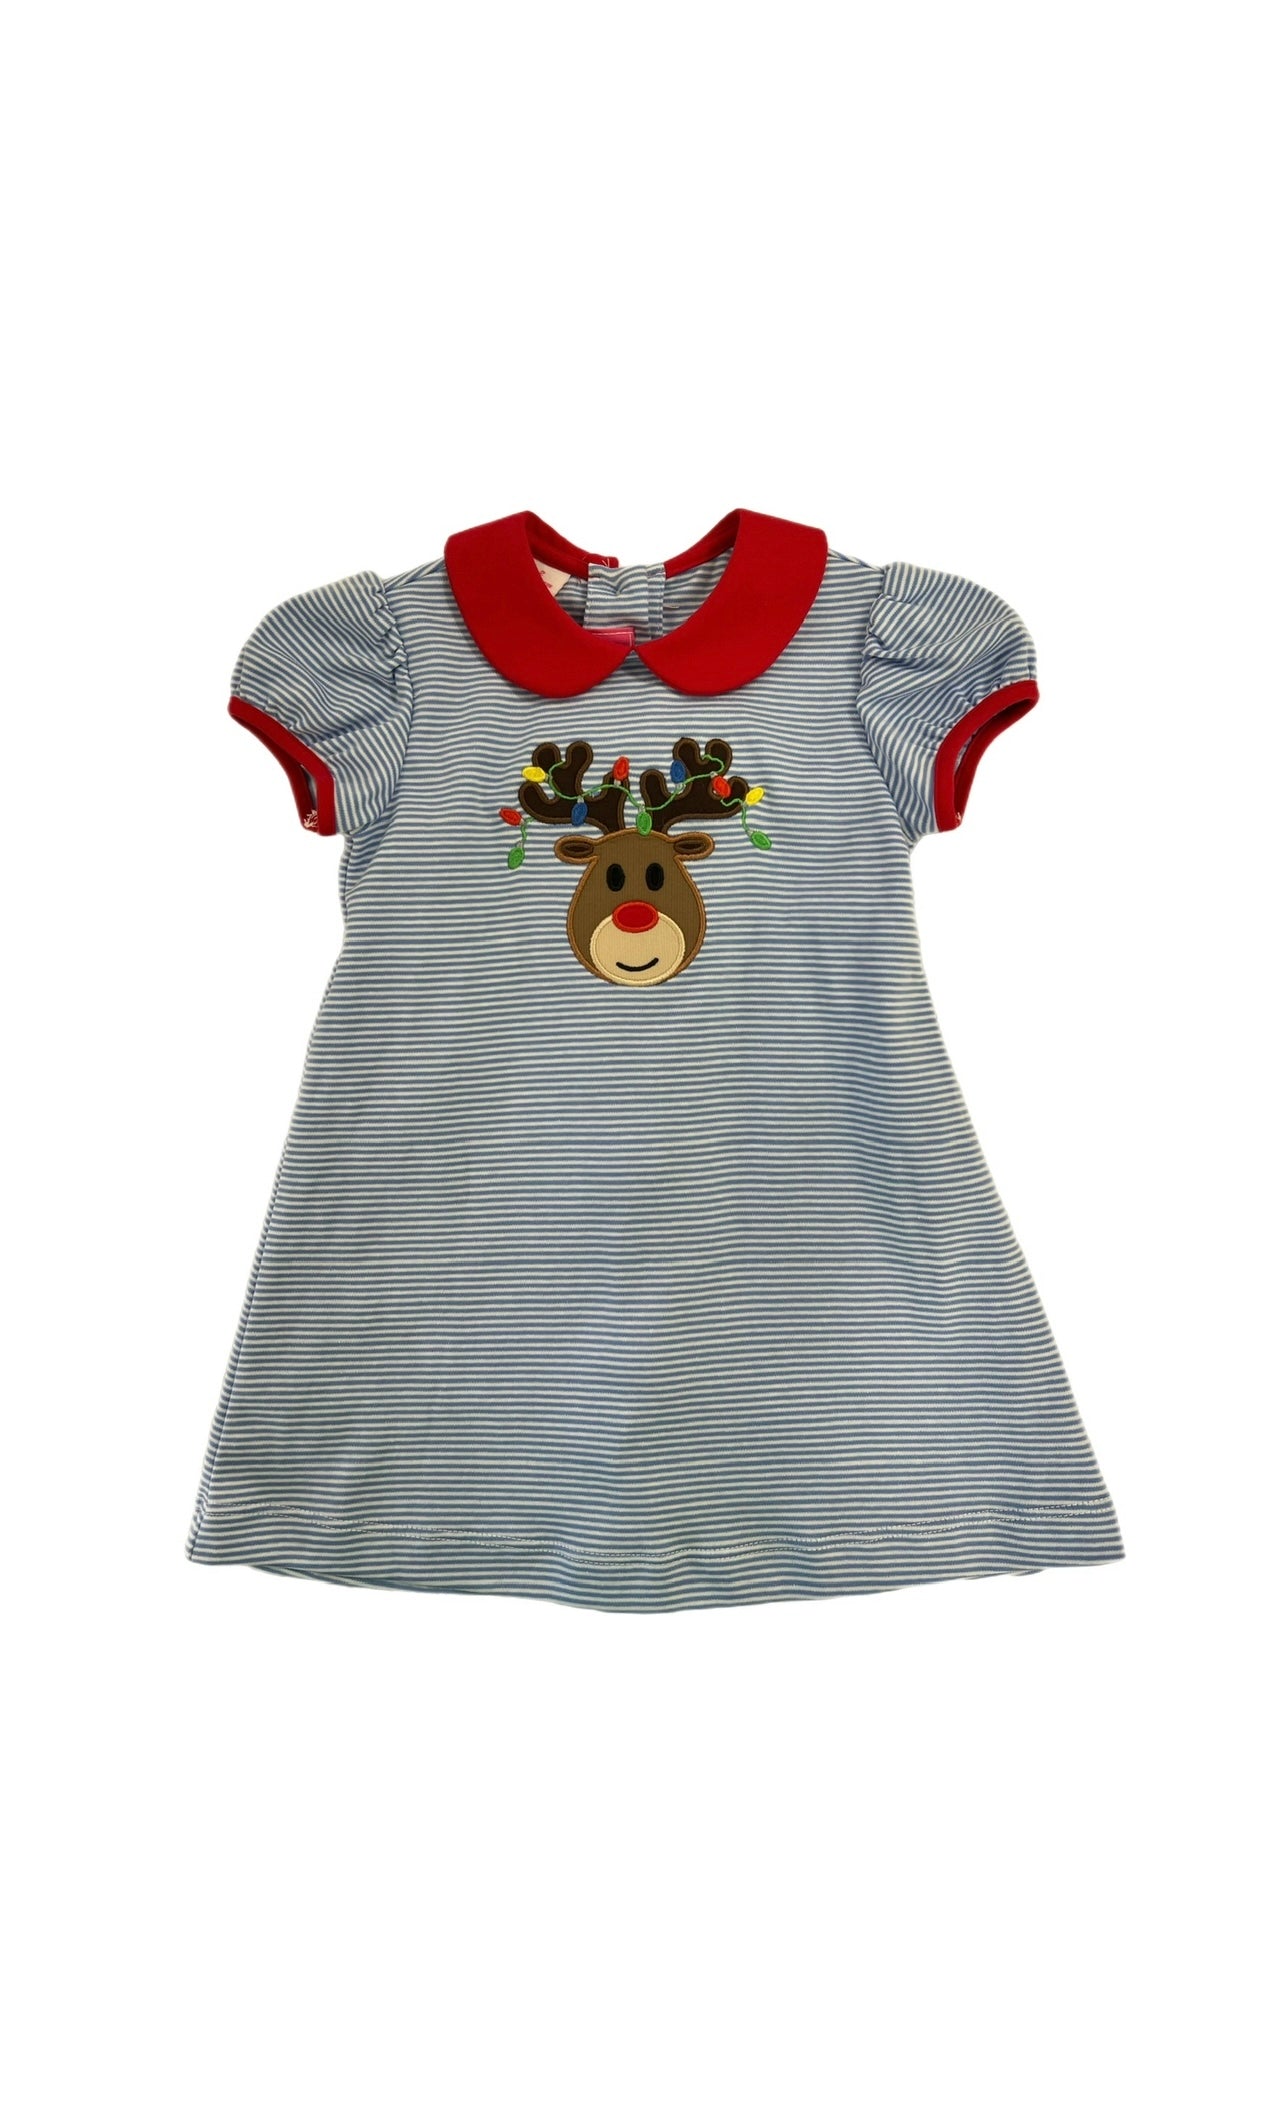 Blue Stripe Knit - Girl's Dress w/ Red Collar S/S Reindeer with Lights